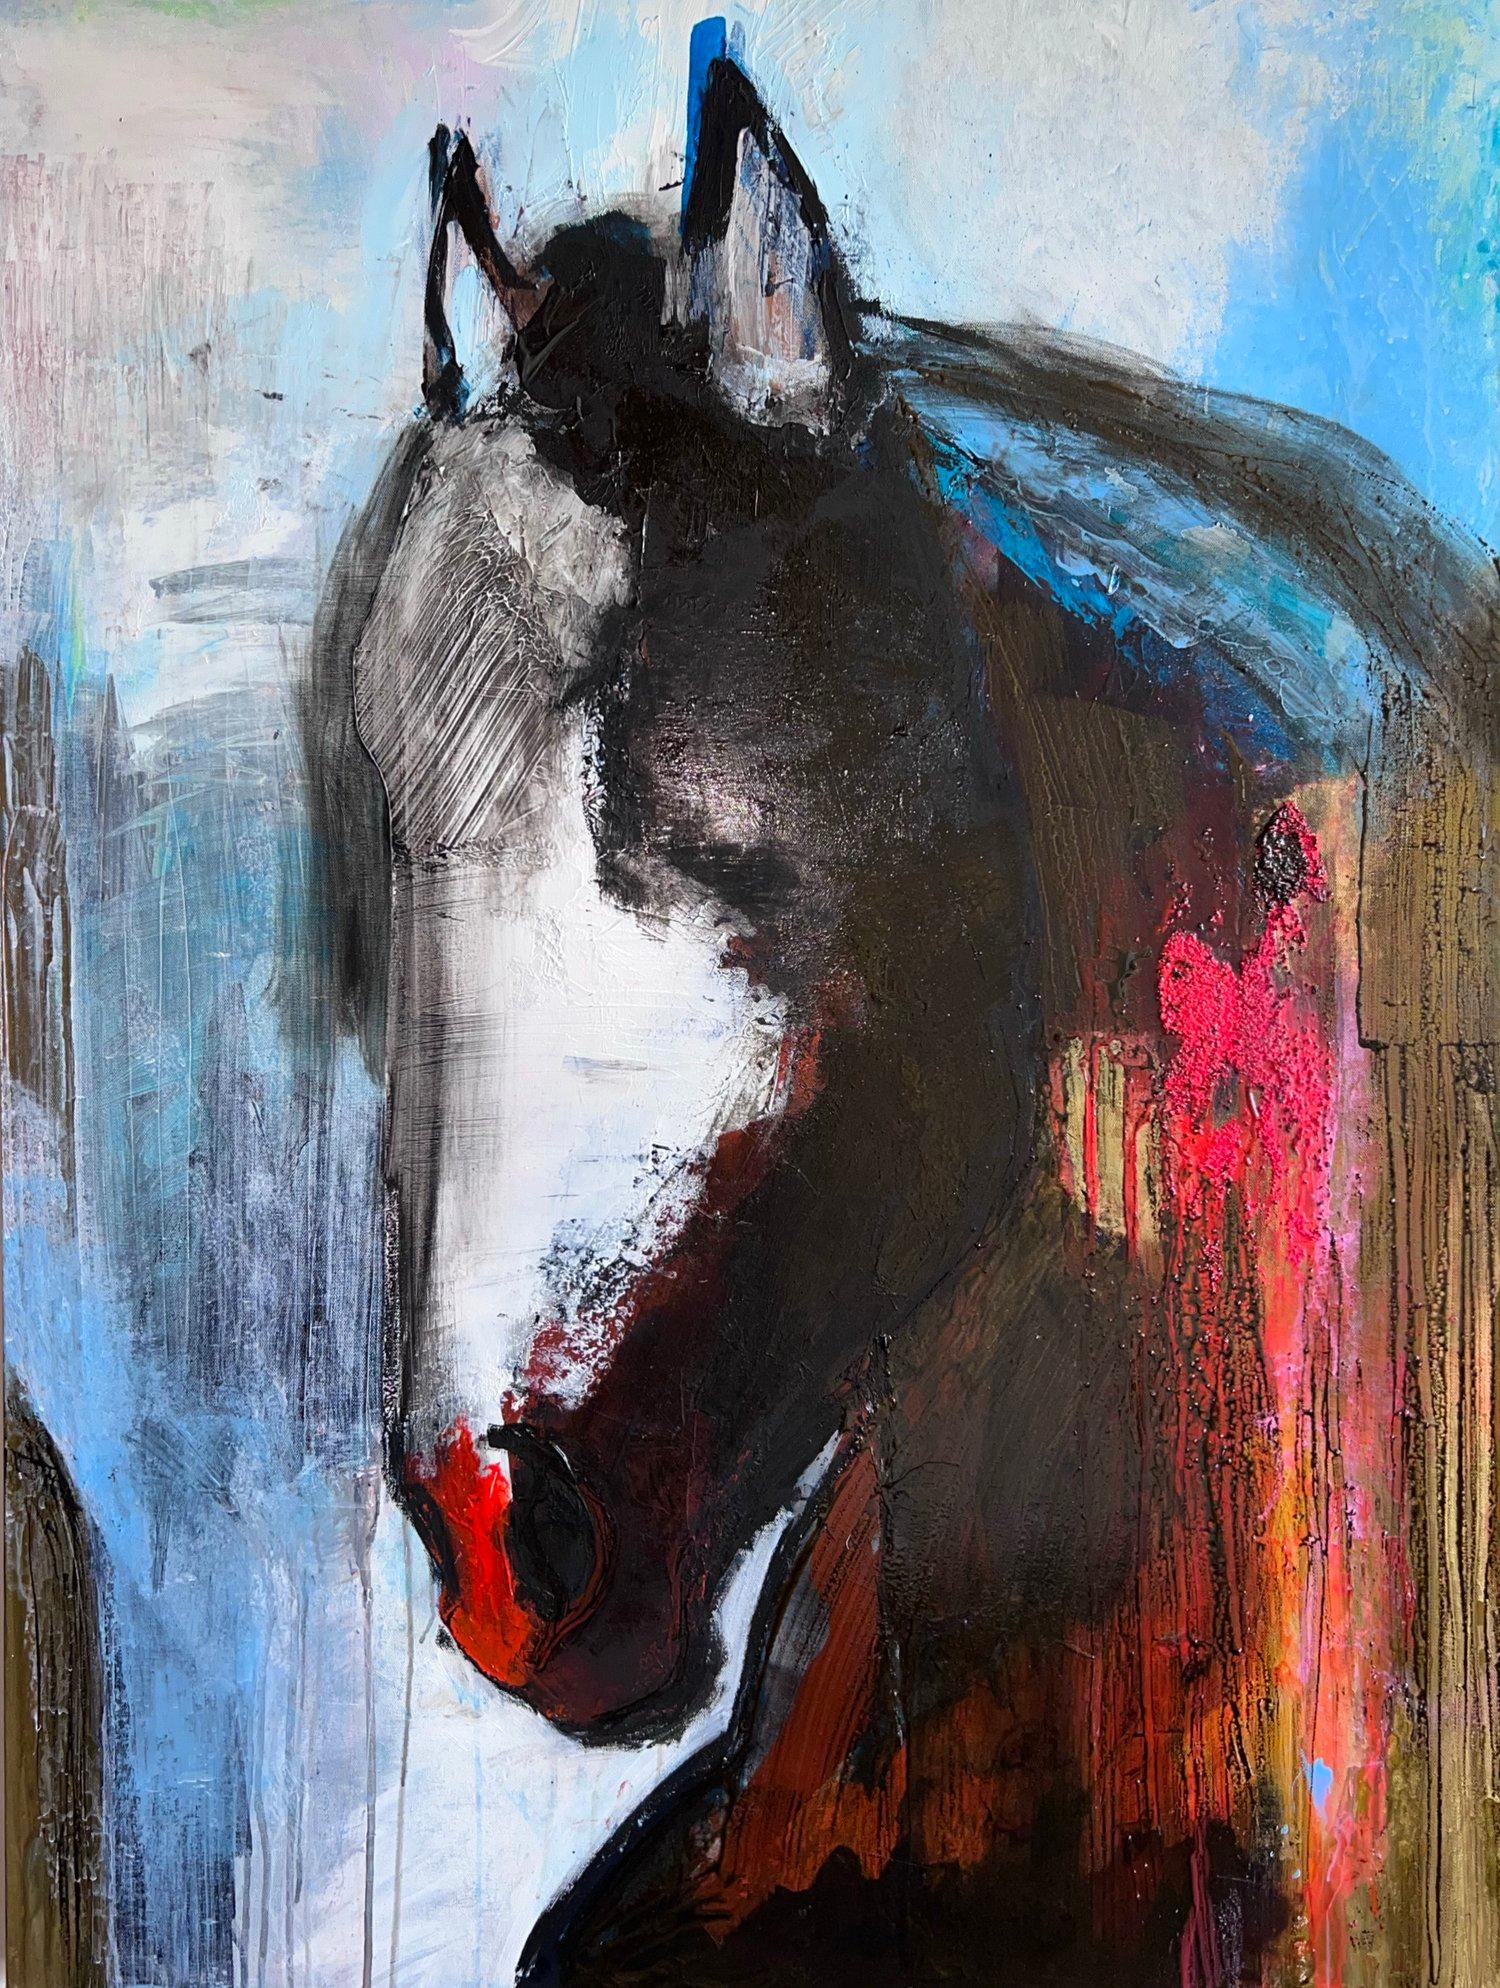 This contemporary equine painting, "Mighty" by artist Gabrielle Benot is a 48x36 original mixed media painting on canvas.  Depicted is a colorful abstract horse from a side profile view.  Blues, blacks and pinks make up the majority of the colors. 